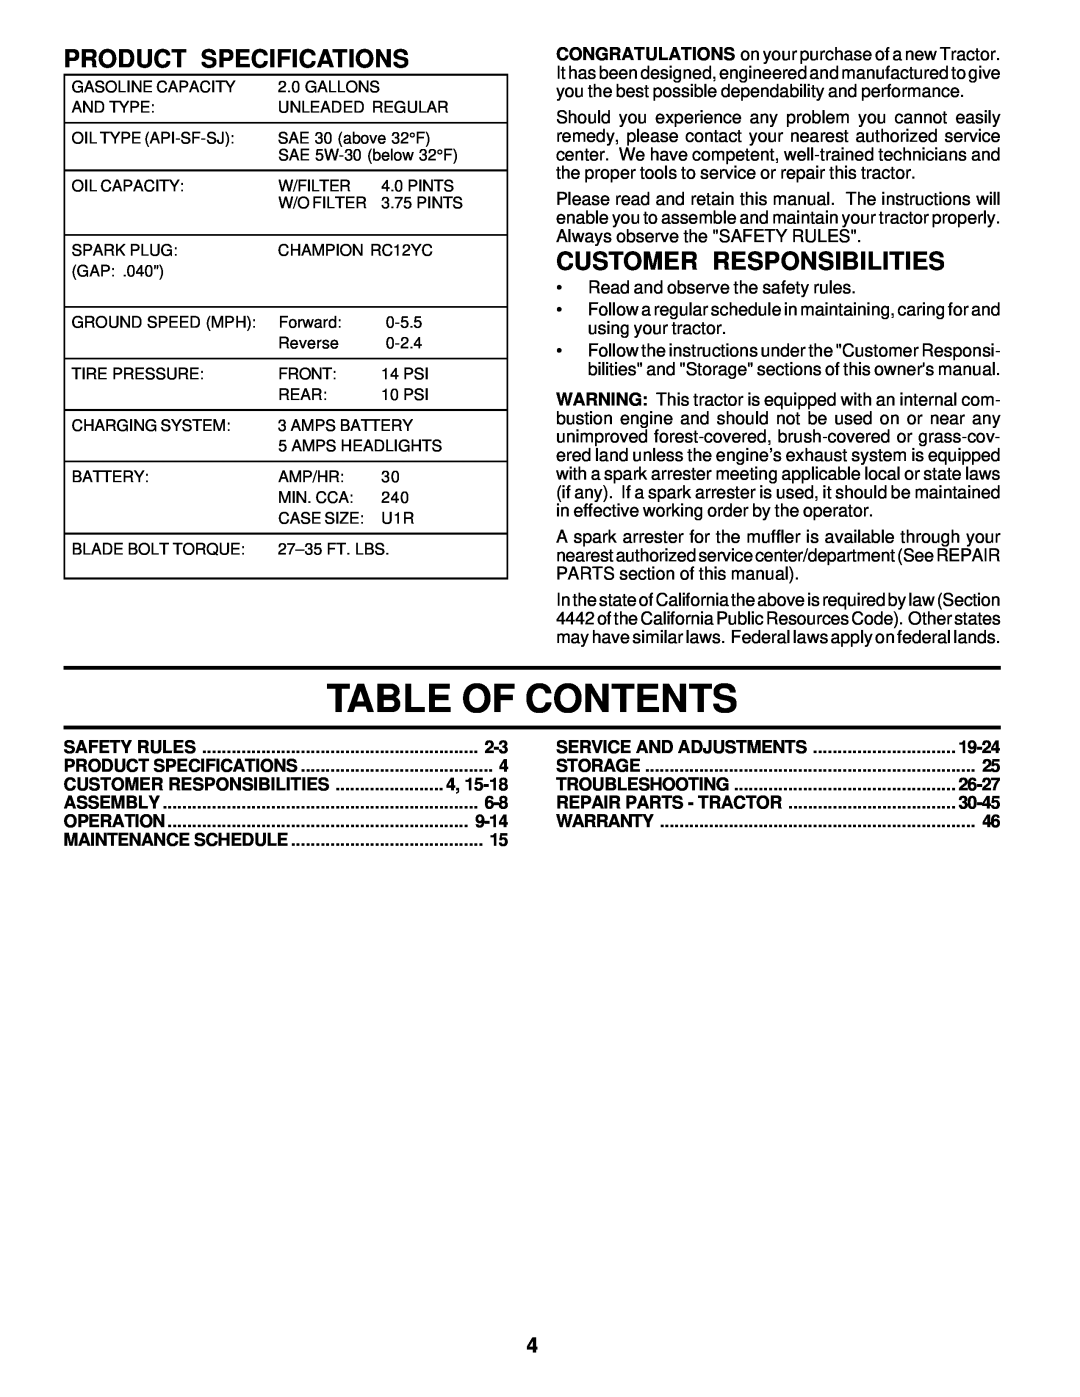 Poulan PR20H42STB owner manual Table Of Contents, Product Specifications, Customer Responsibilities 